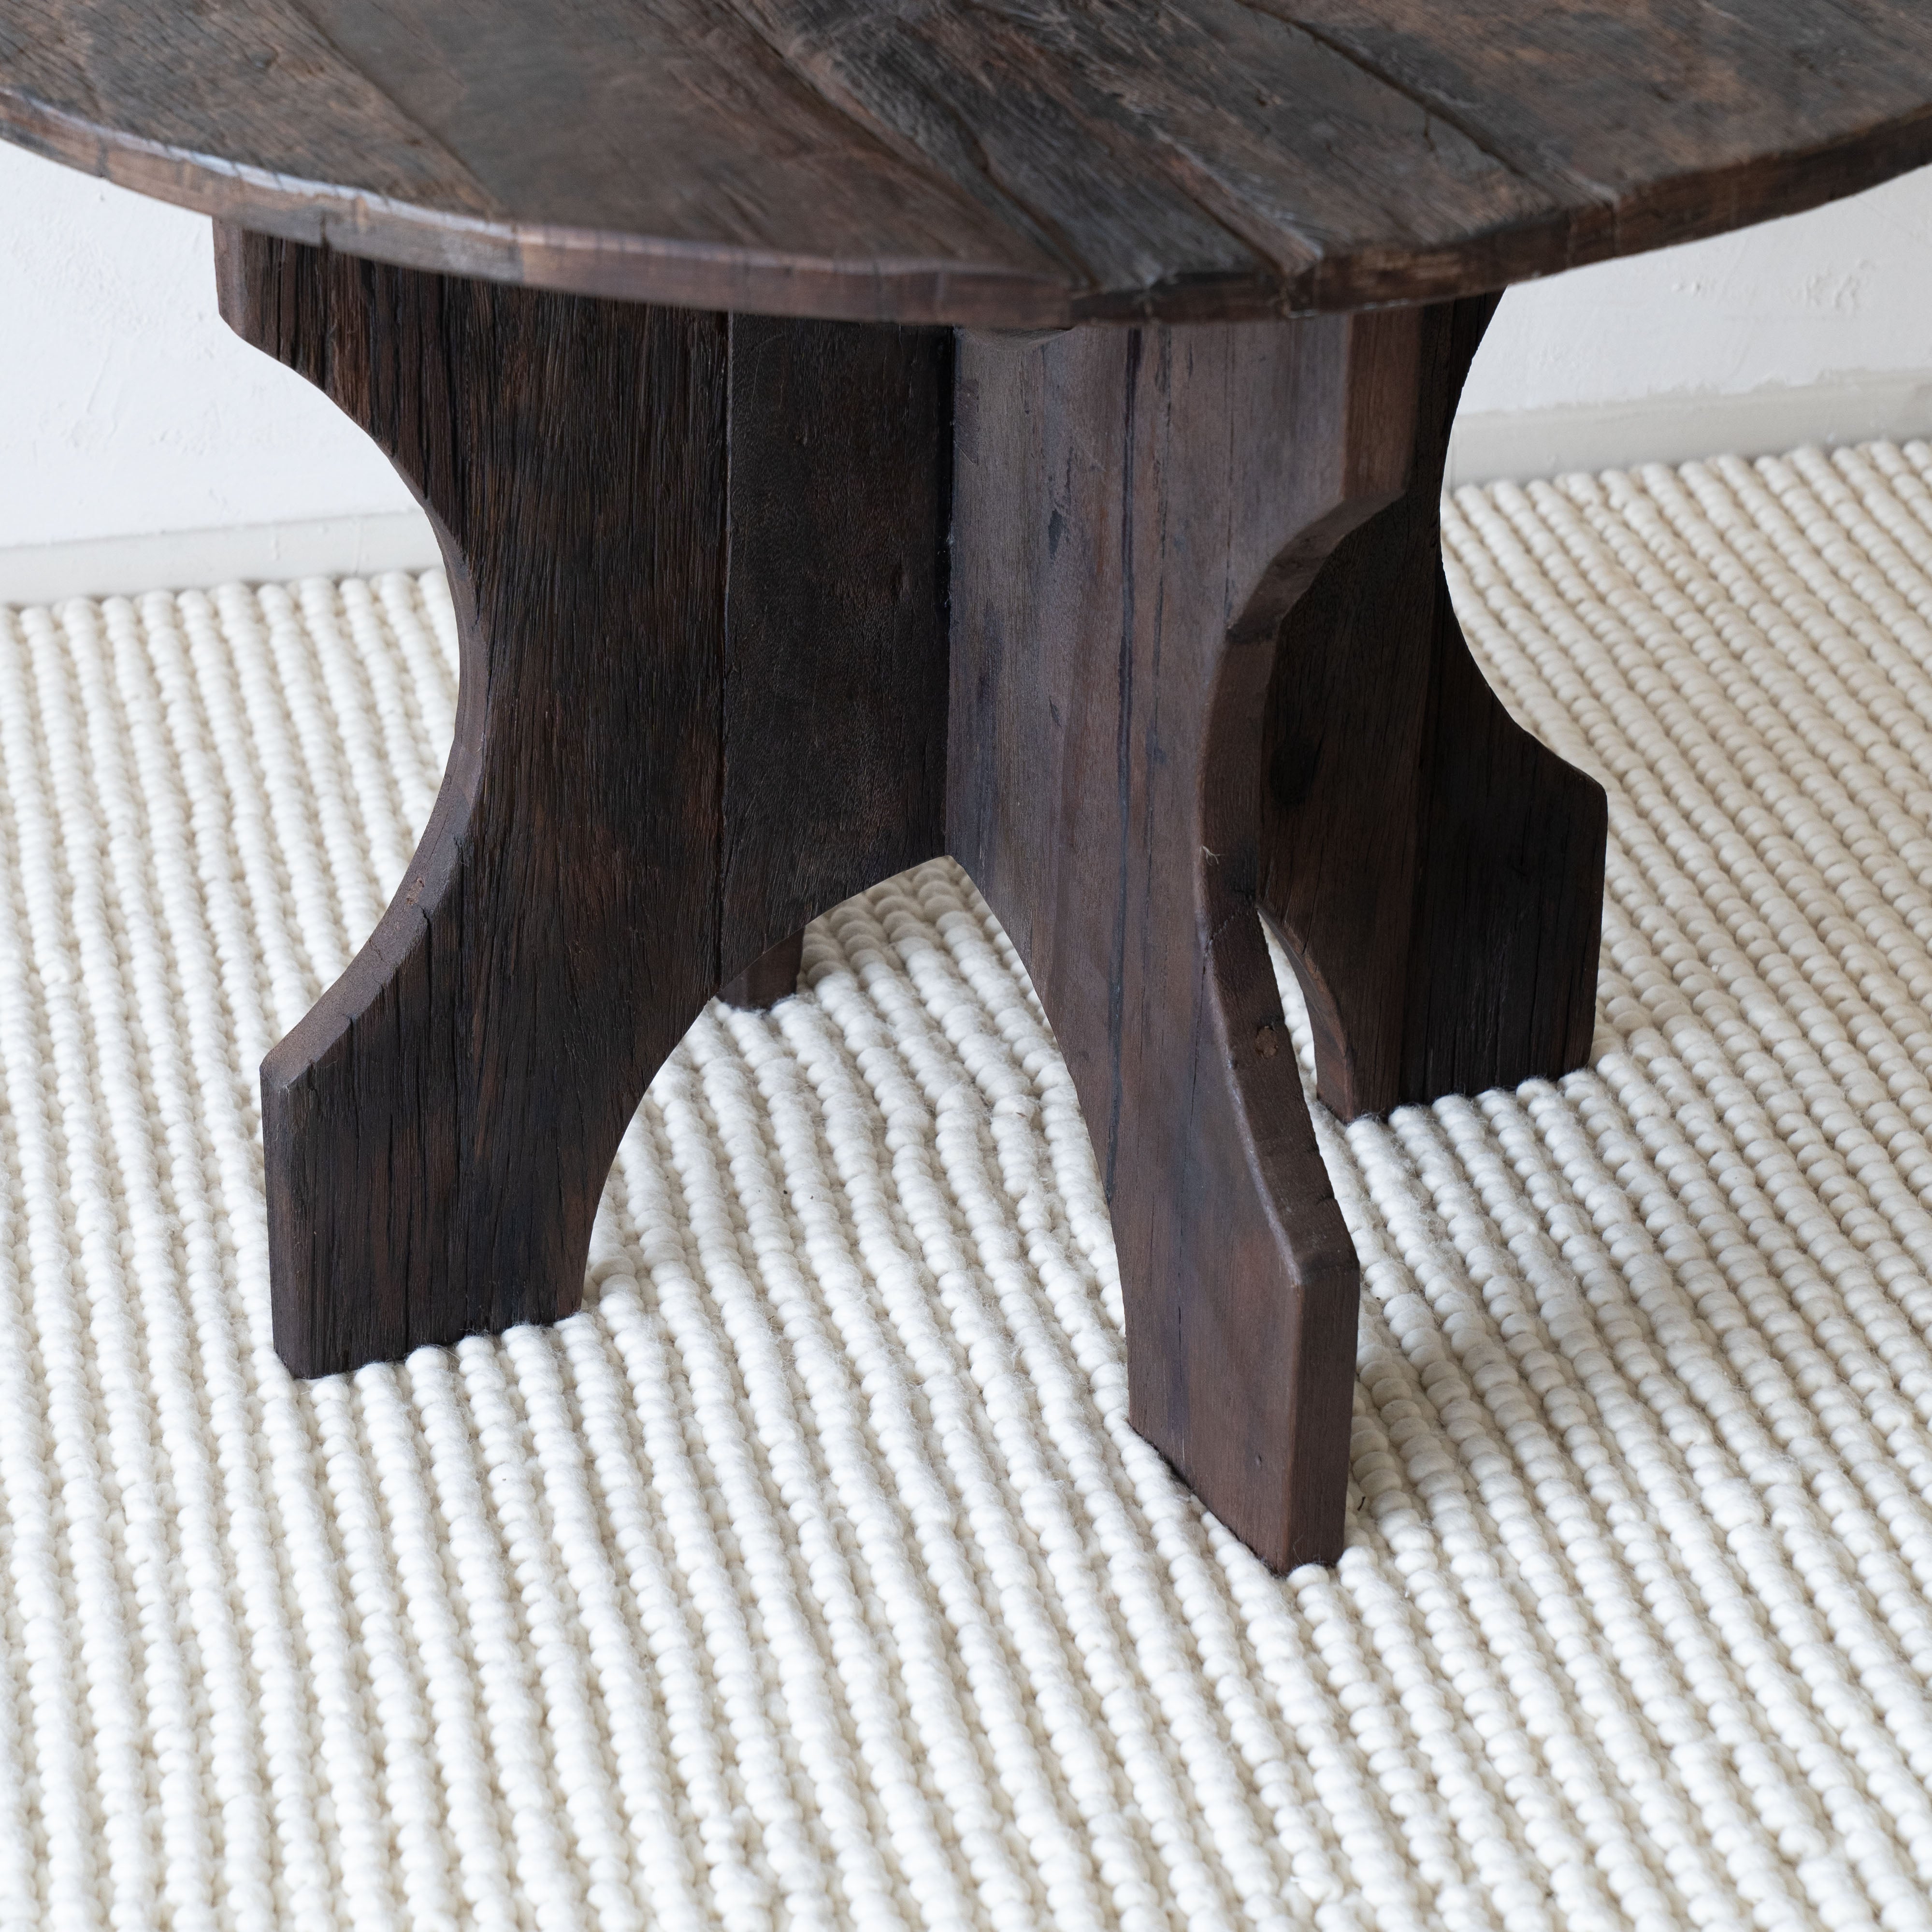 Ikou Round Wooden Dining Table  - WS Living - UAE - Dining Tables Wood and steel Furnitures - Dubai